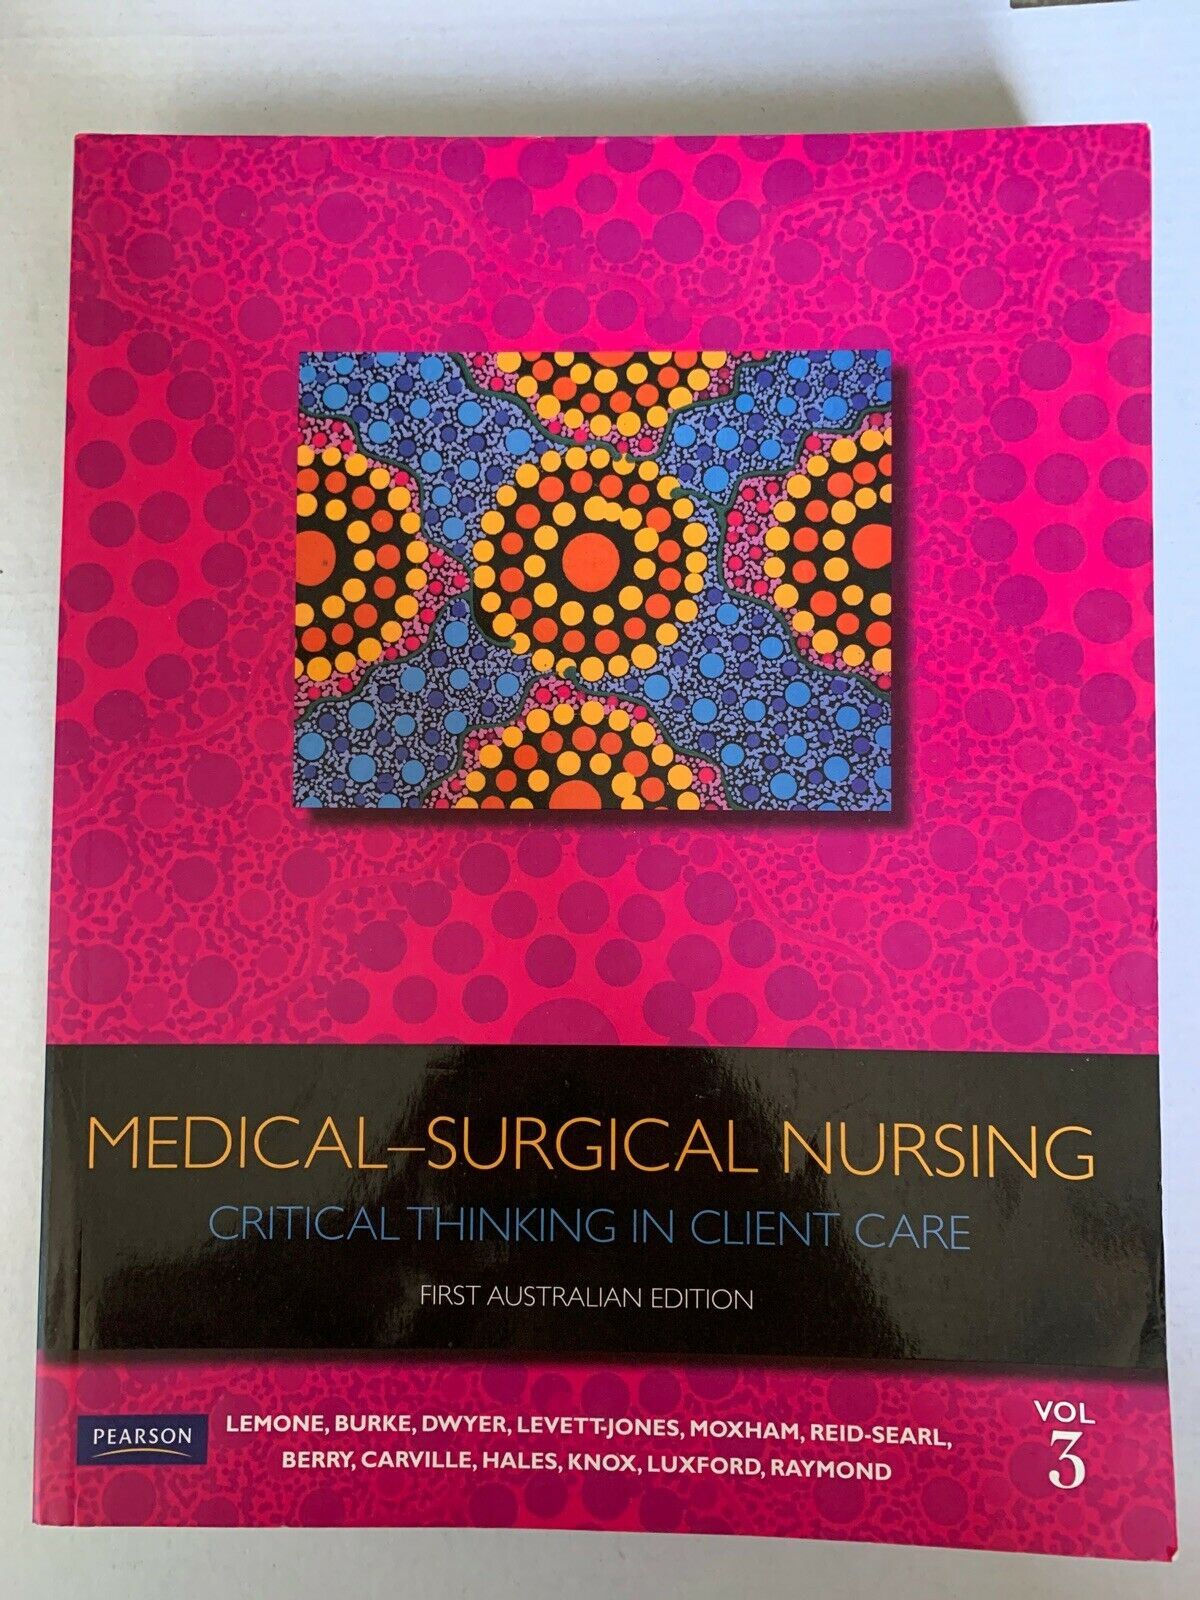 Medical-Surgical Nursing Critical Thinking and Care 1st Aust ed Vol 3. 2011